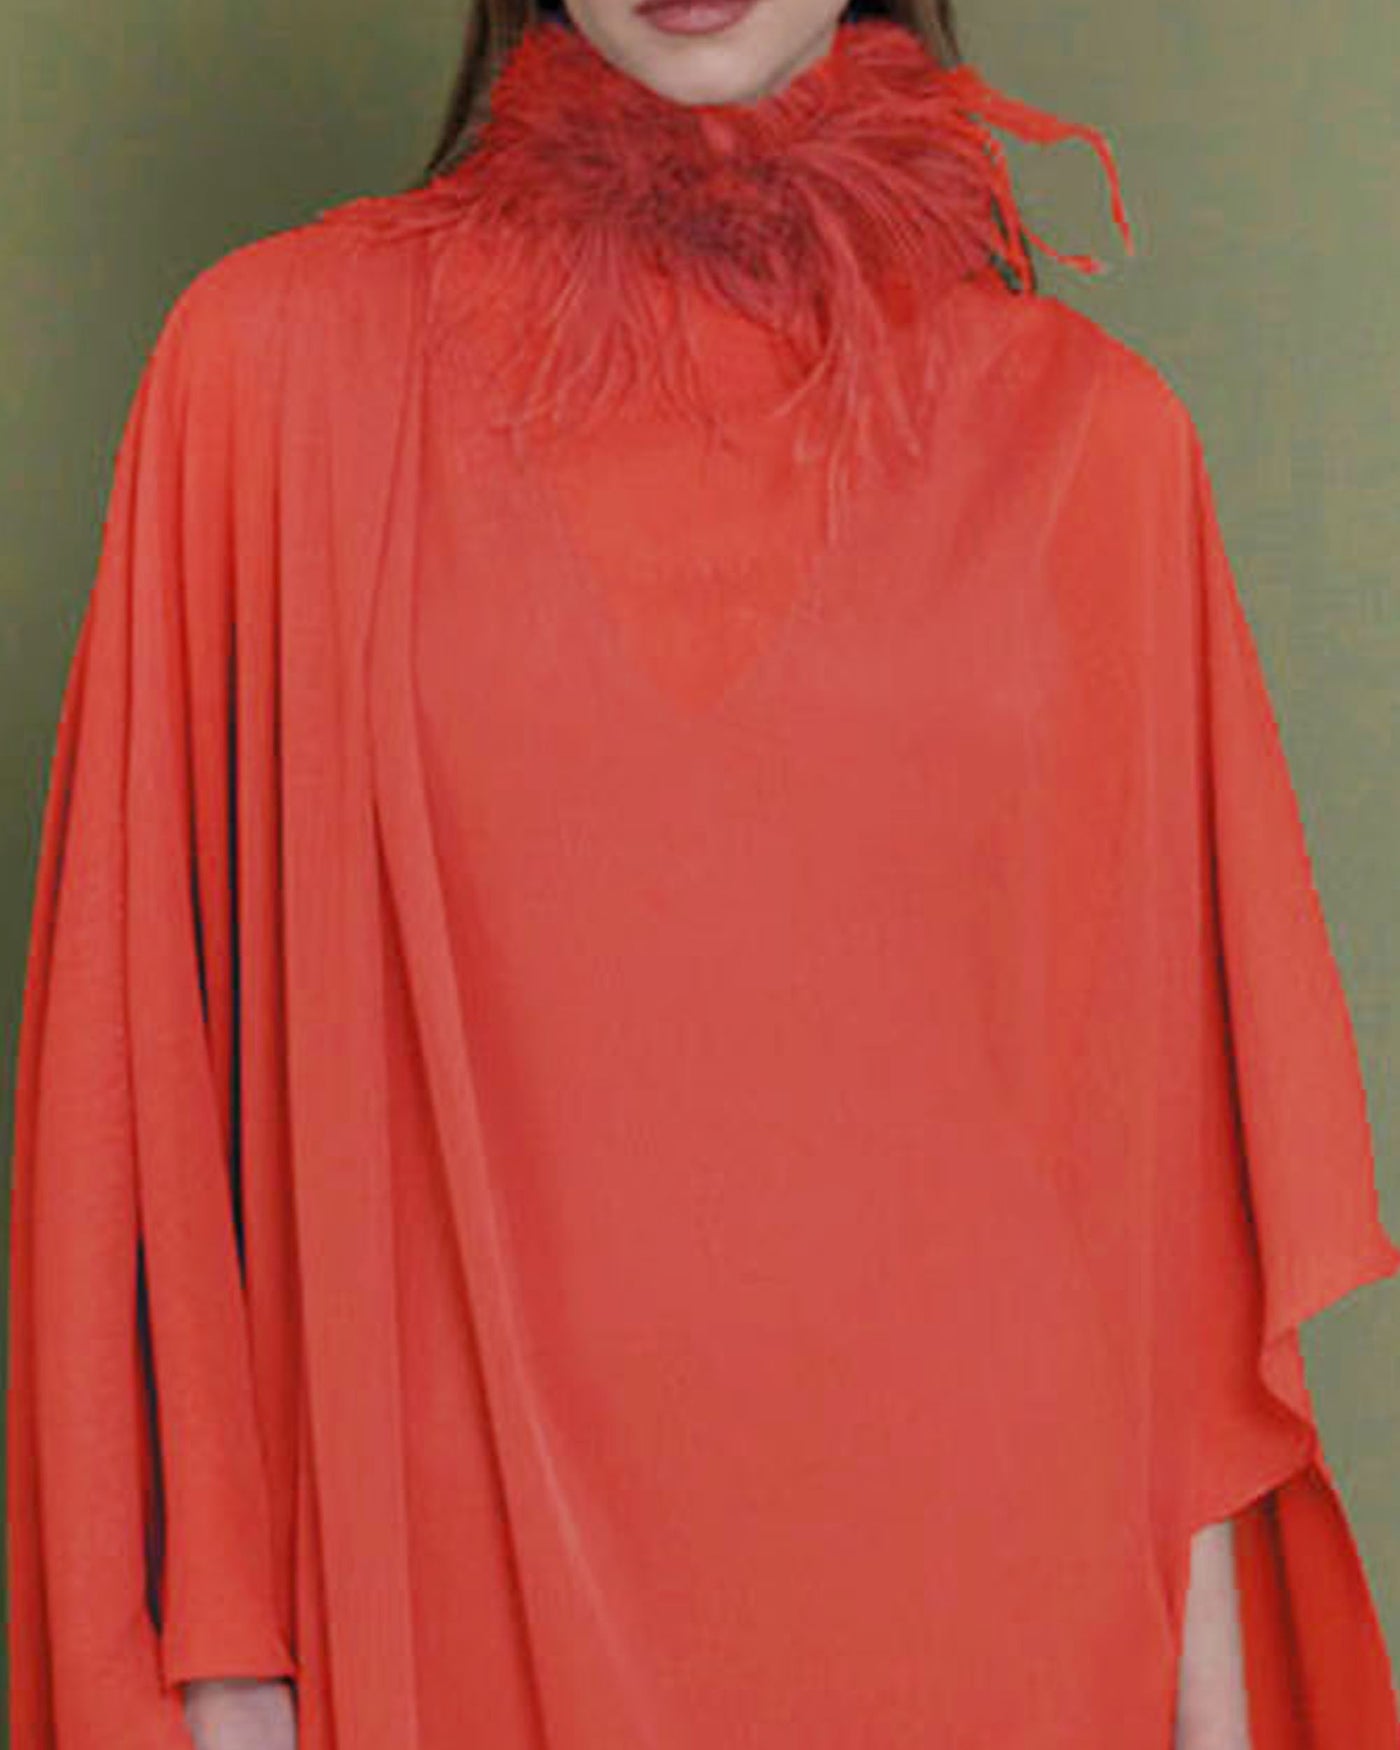 Cape-Like Coral Dress with Collar